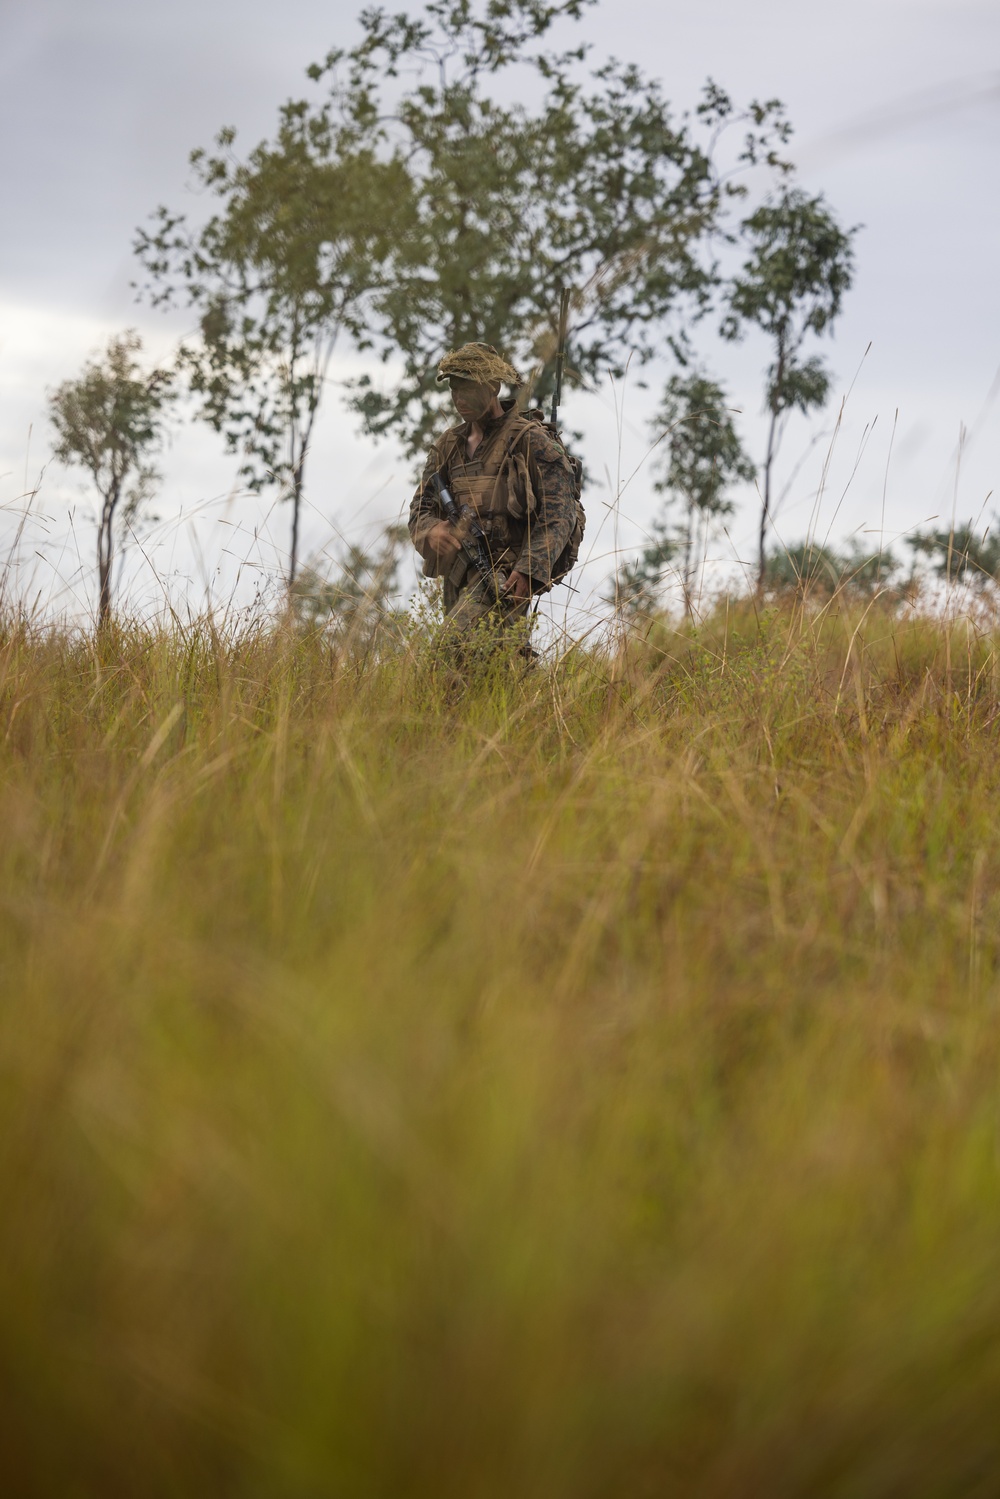 MRF-D 24.3: Marines emplace obstacles during Exercise Southern Jackaroo 24